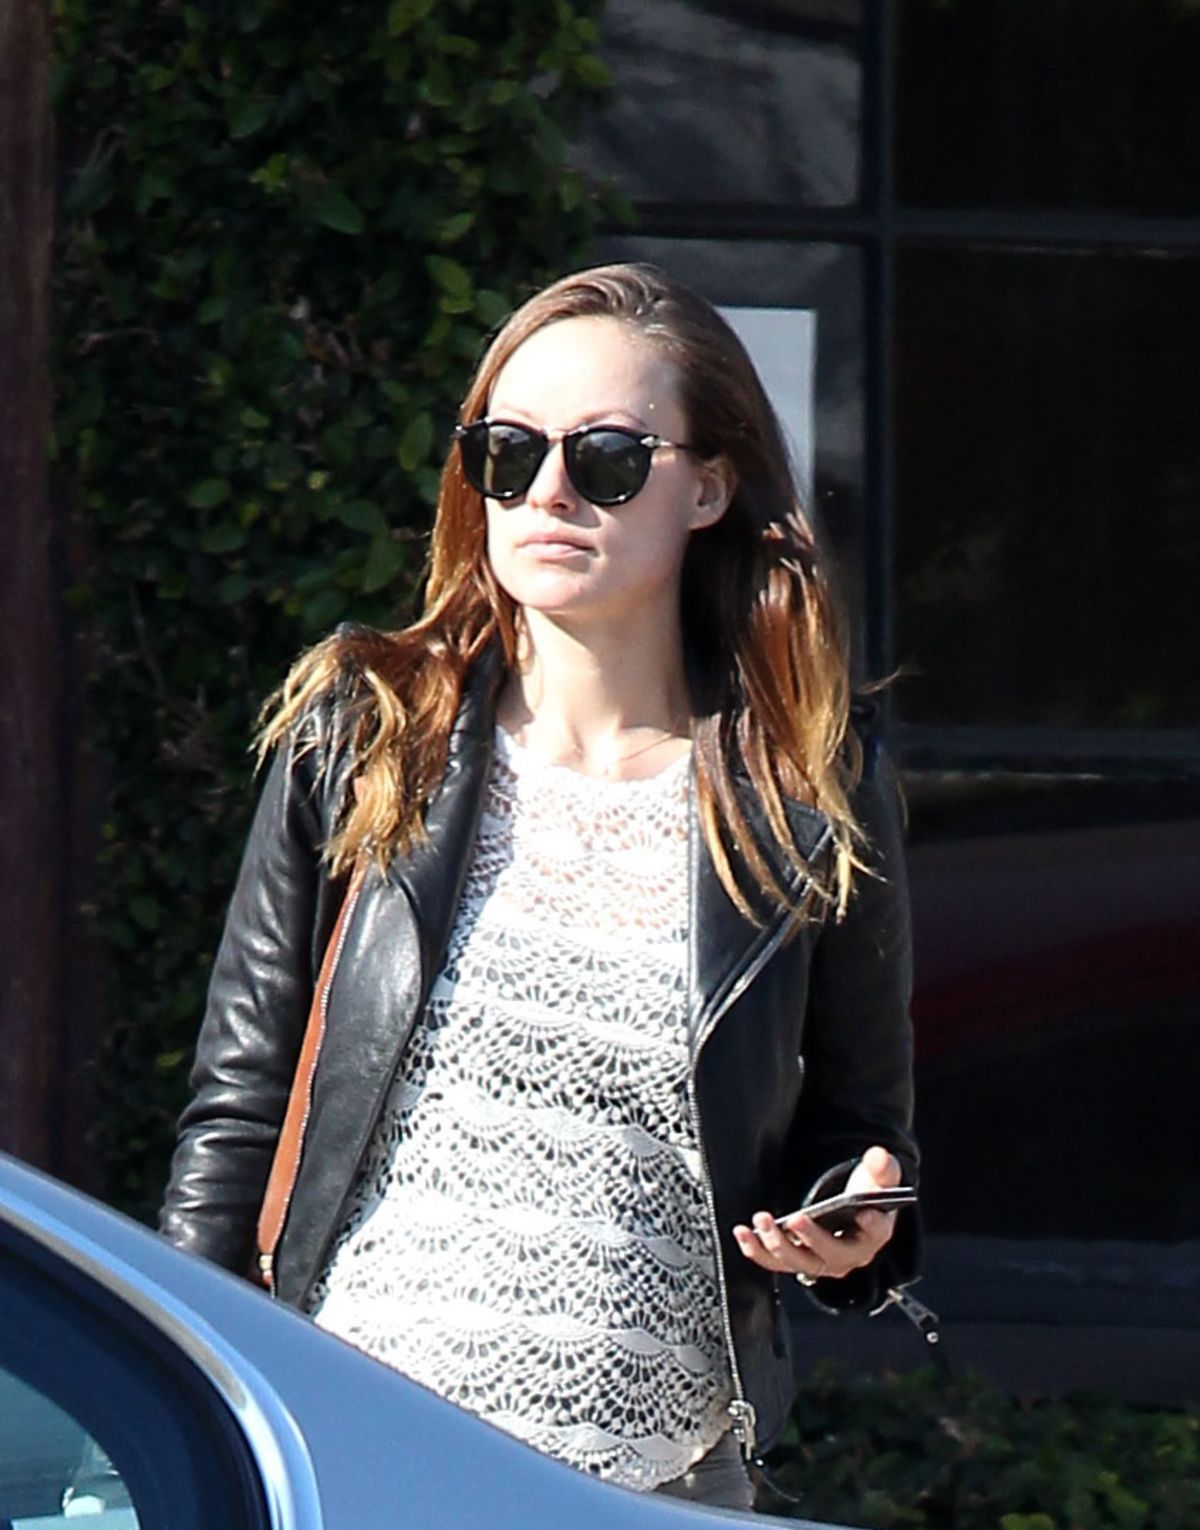 OLIVIA WILDE Out and About in Los Angeles 1001